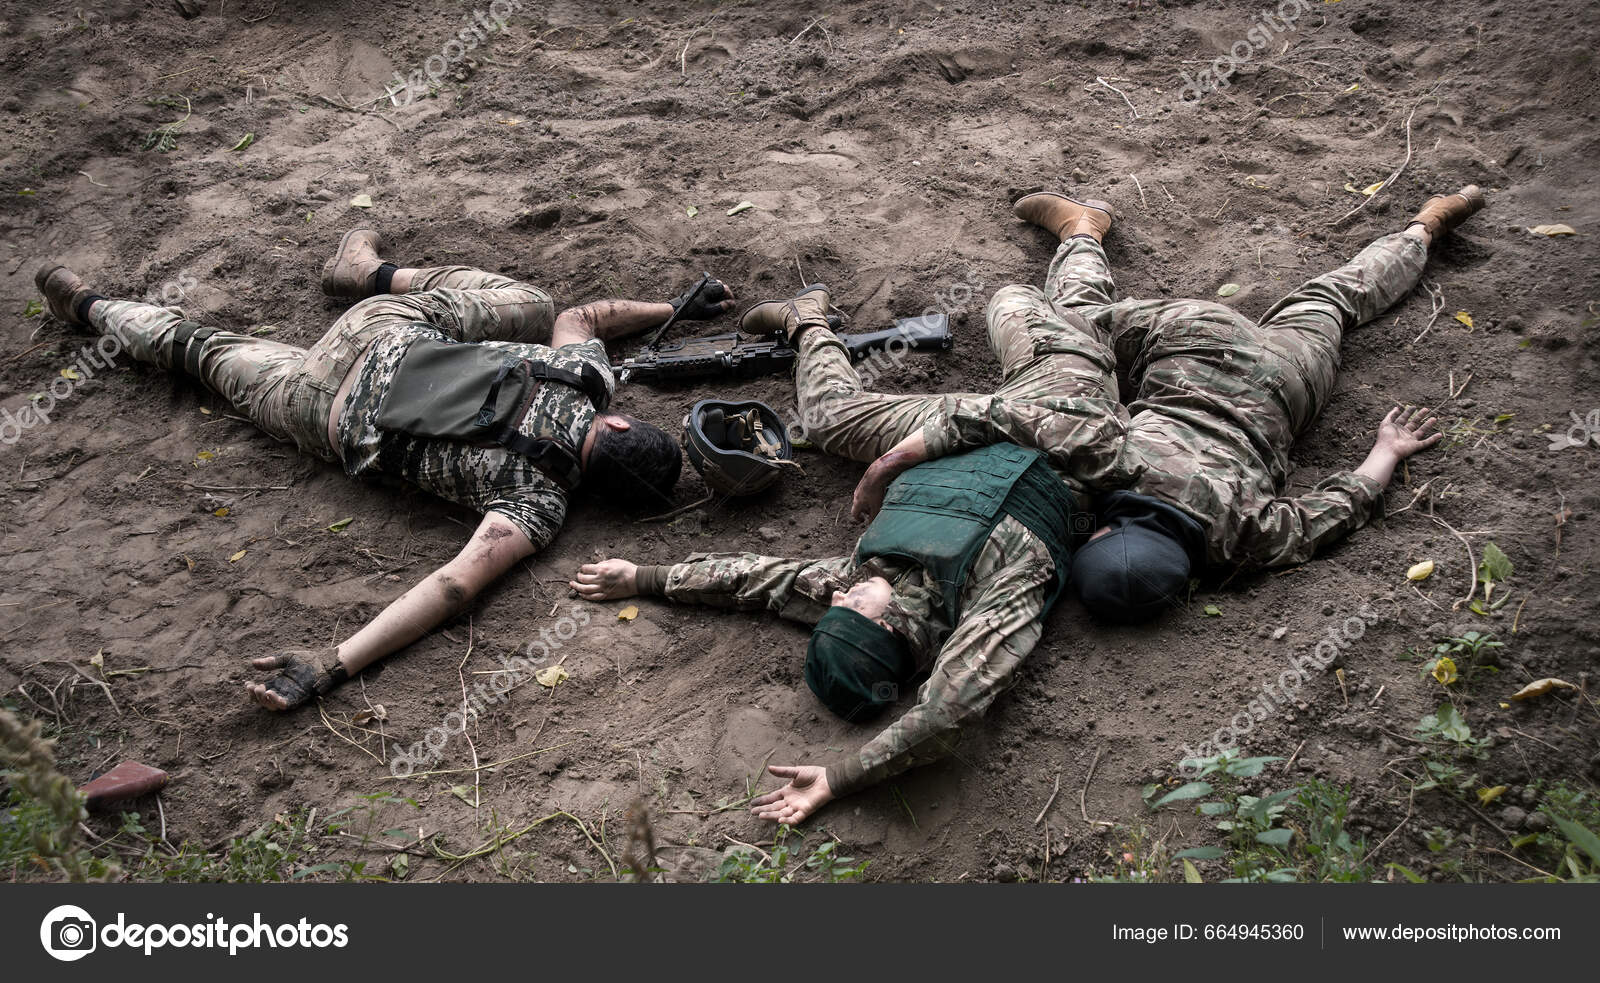 What are the most chilling images of shell-shocked soldiers from